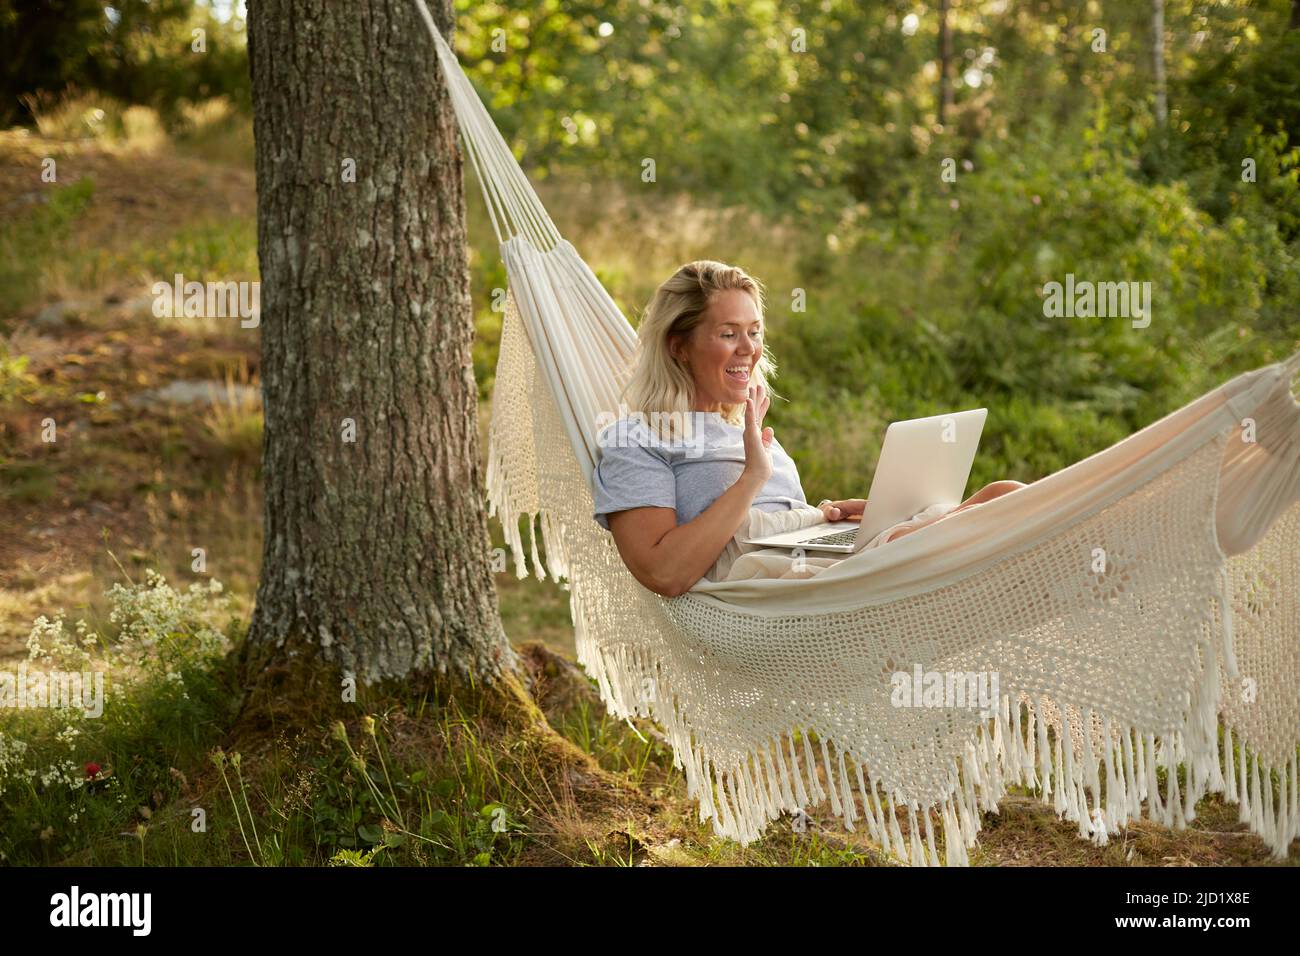 Woman using laptop in hammock Banque D'Images